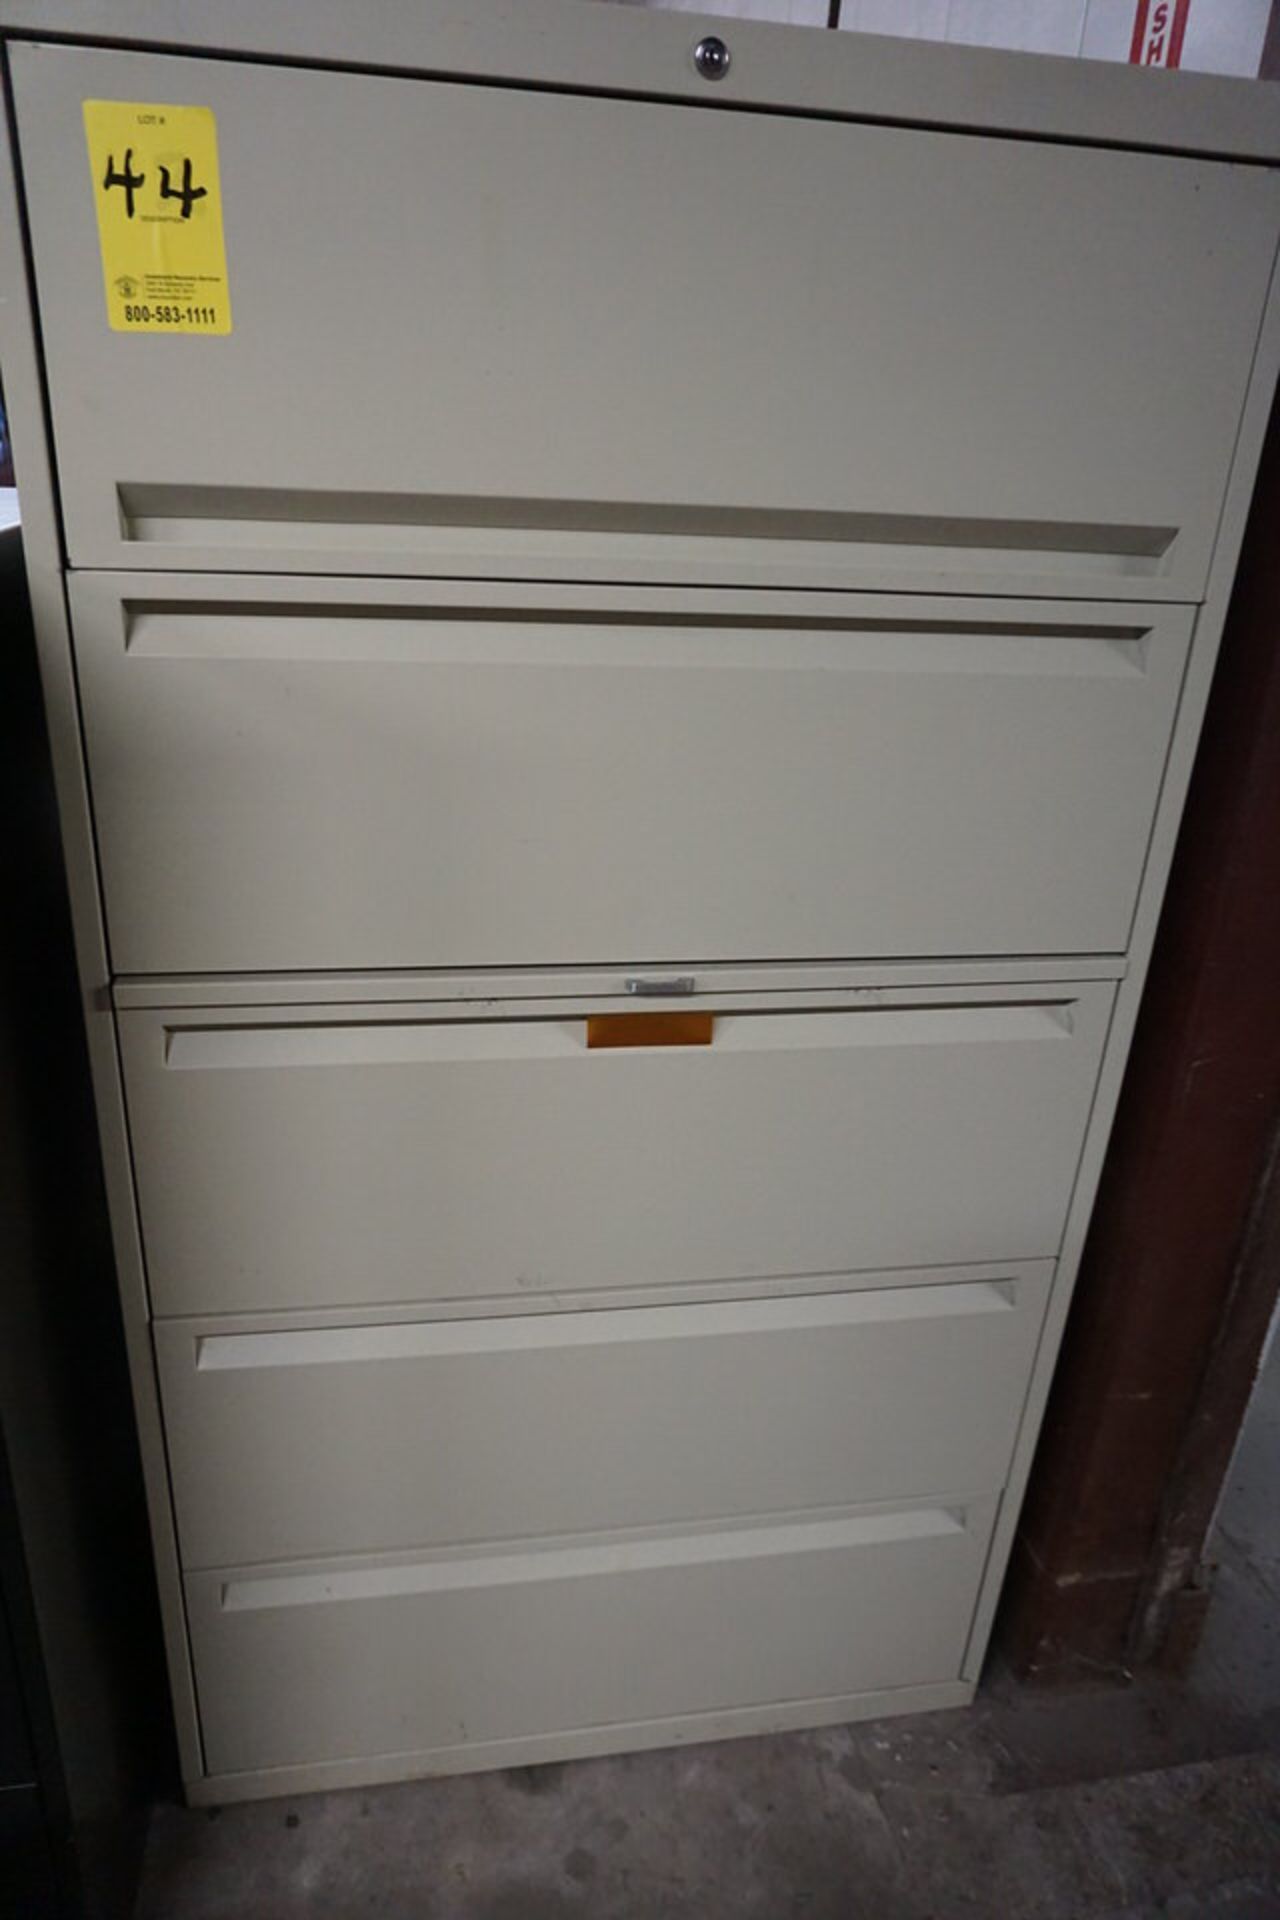 FILE CABINETS: (1) 5 DRAWER LATERAL, (1) 4 DRAWER, (3) 2 DRAWER VERTICALS - Image 2 of 4